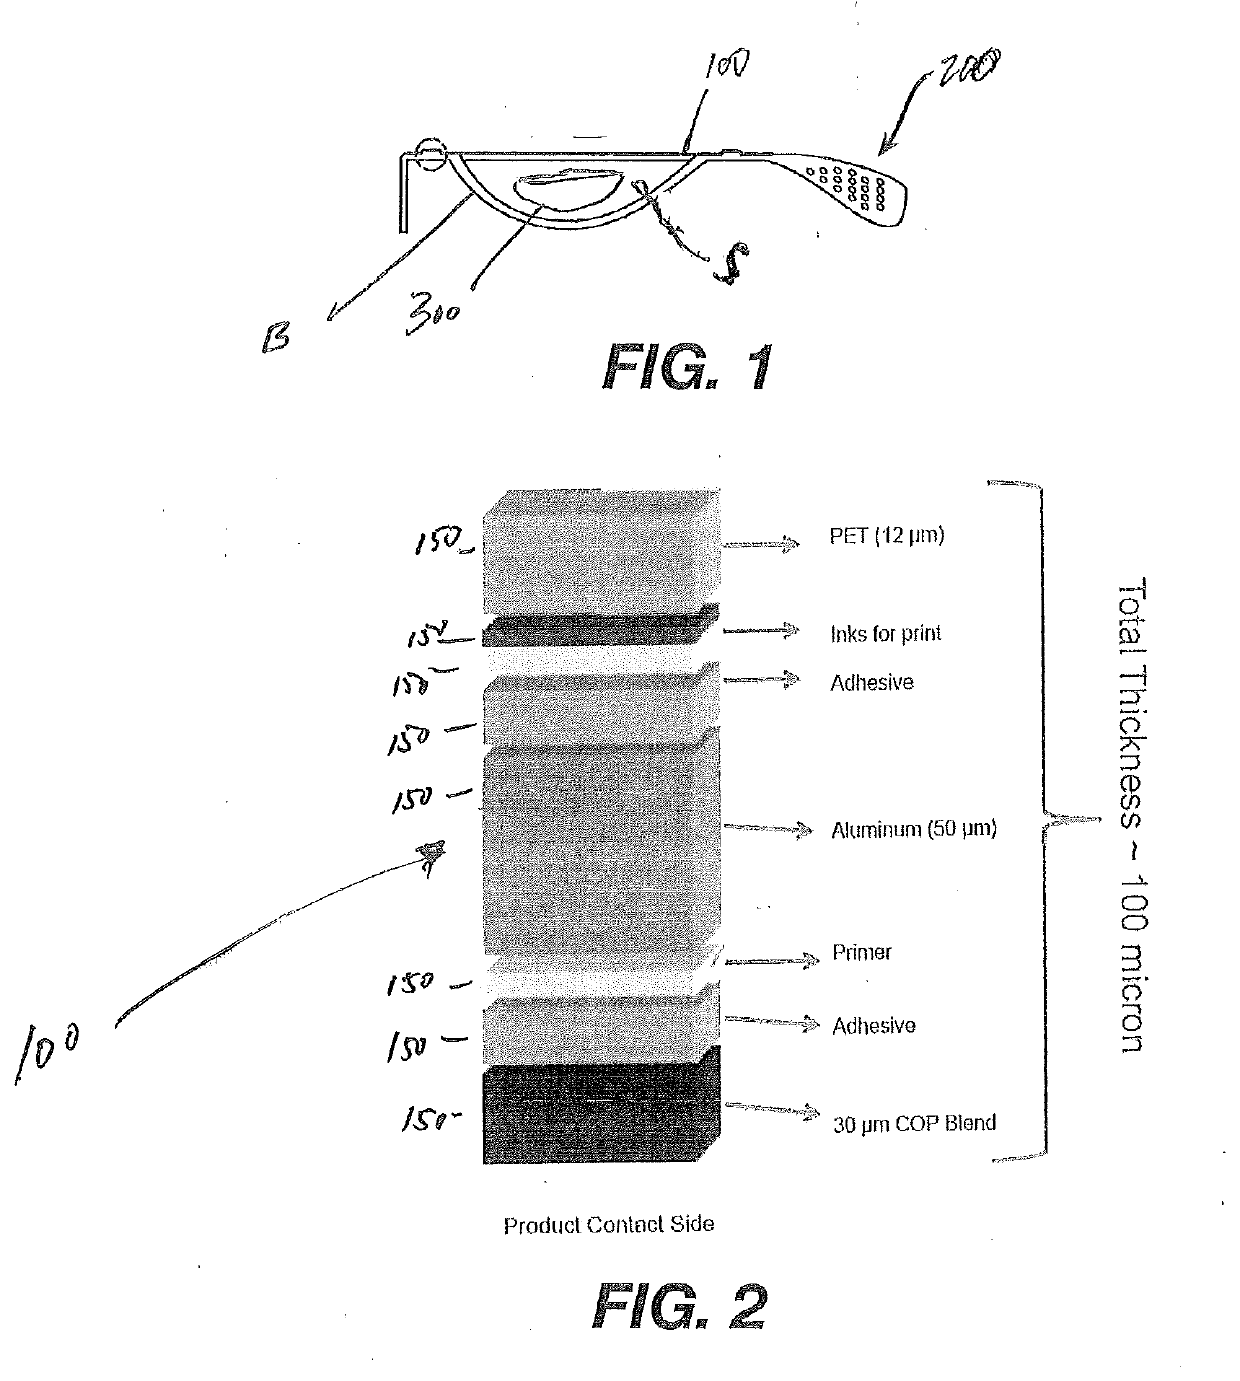 Package for an Ophthalmic Device Having a Multilayer Lidstock Containing a Cyclic Olefin Seal Layer